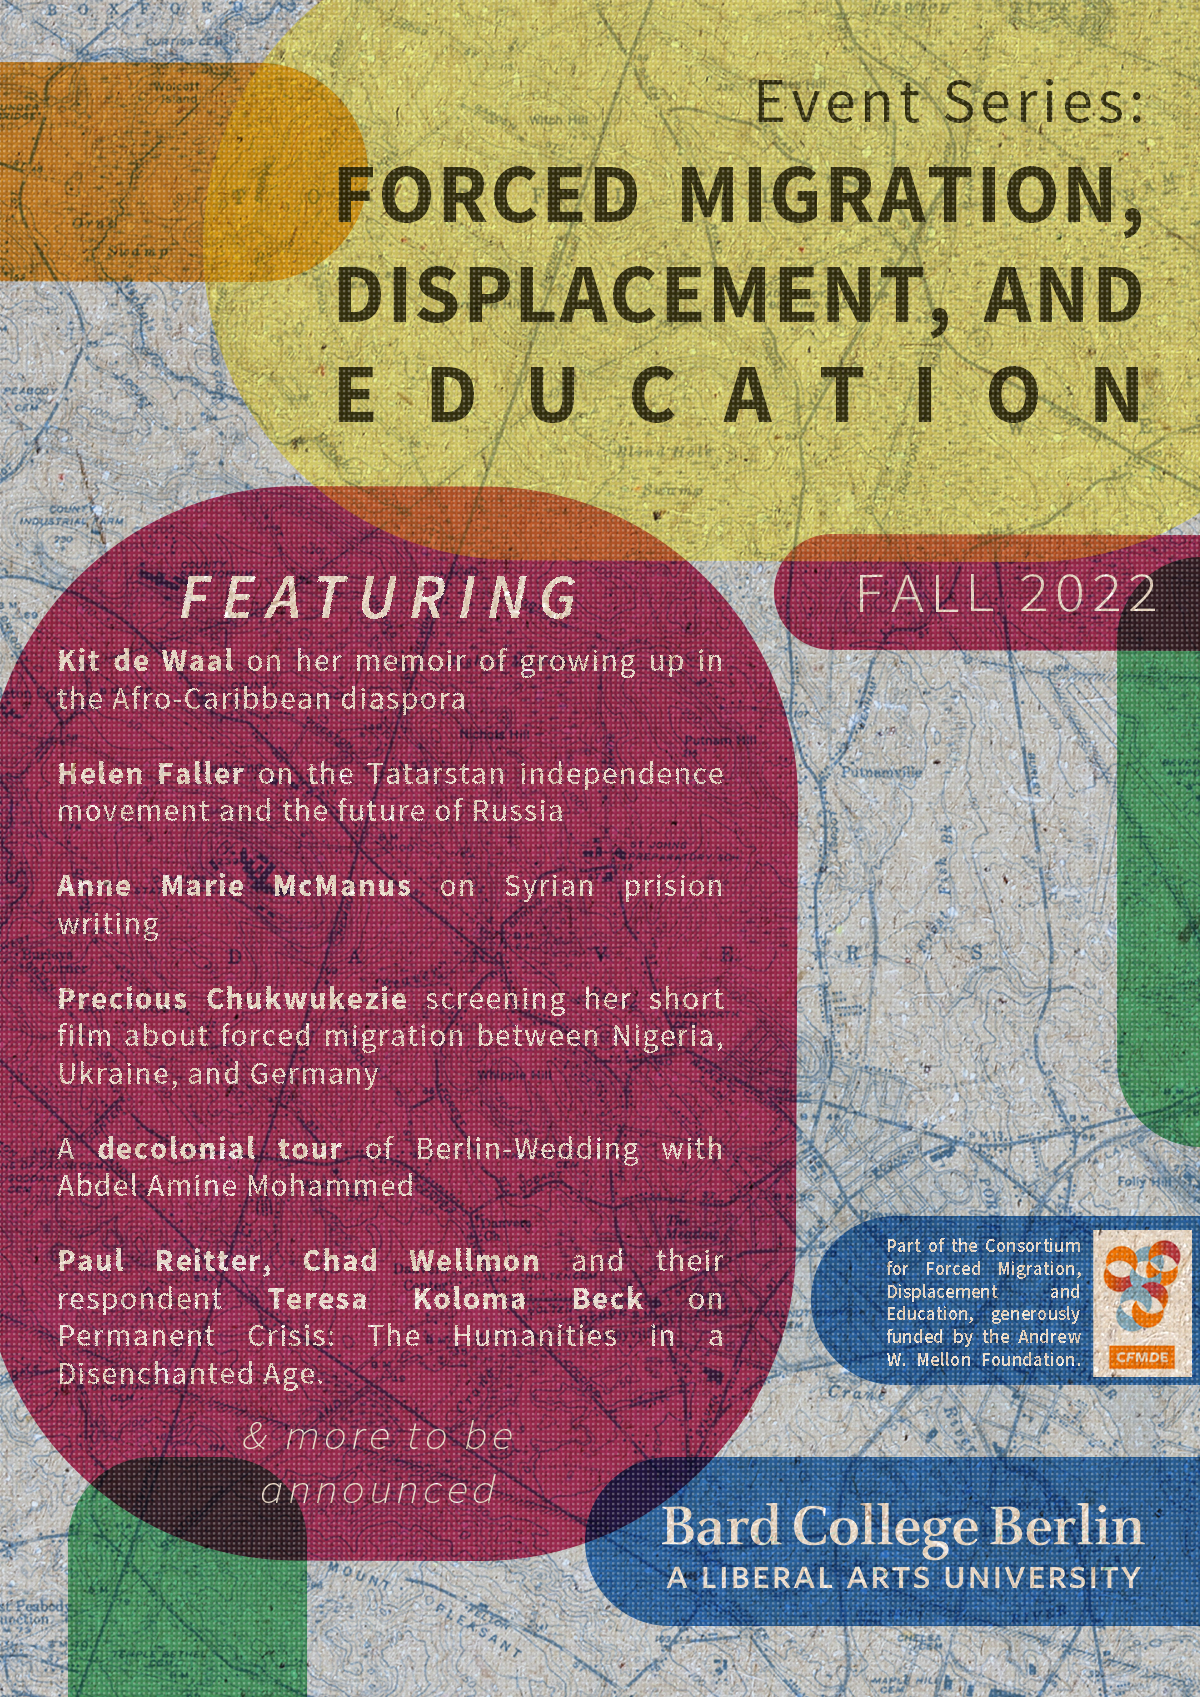 Event Series: Forced Migration, Displacement, and Education